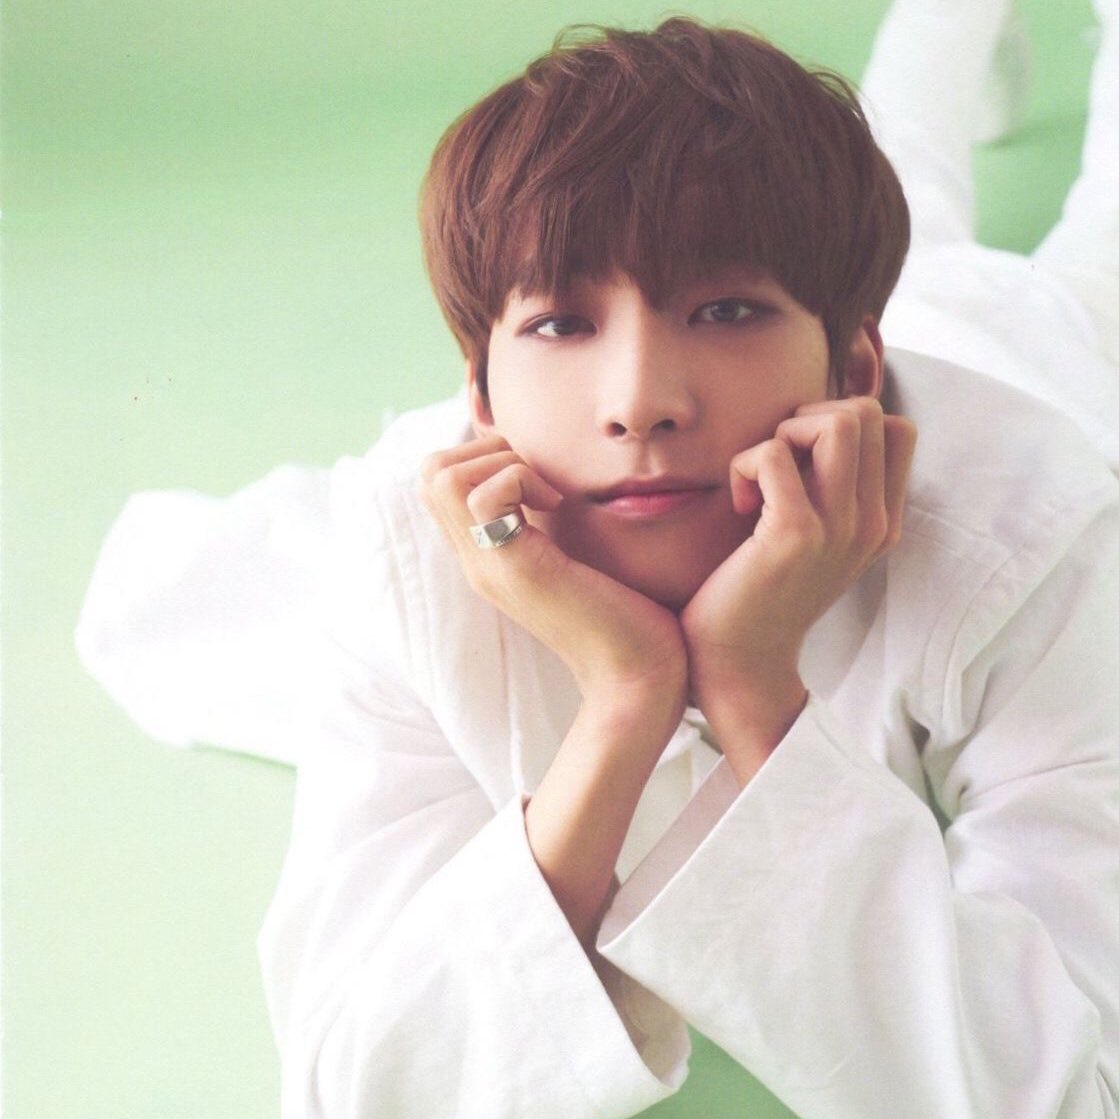 wonwoo ; green— the colour of healing, implying unconditional love, forgiveness, compassion, growth, calmness, compassion and generosity. Good to have around during a crisis as they remain calm and take control of the situation until it is resolved.